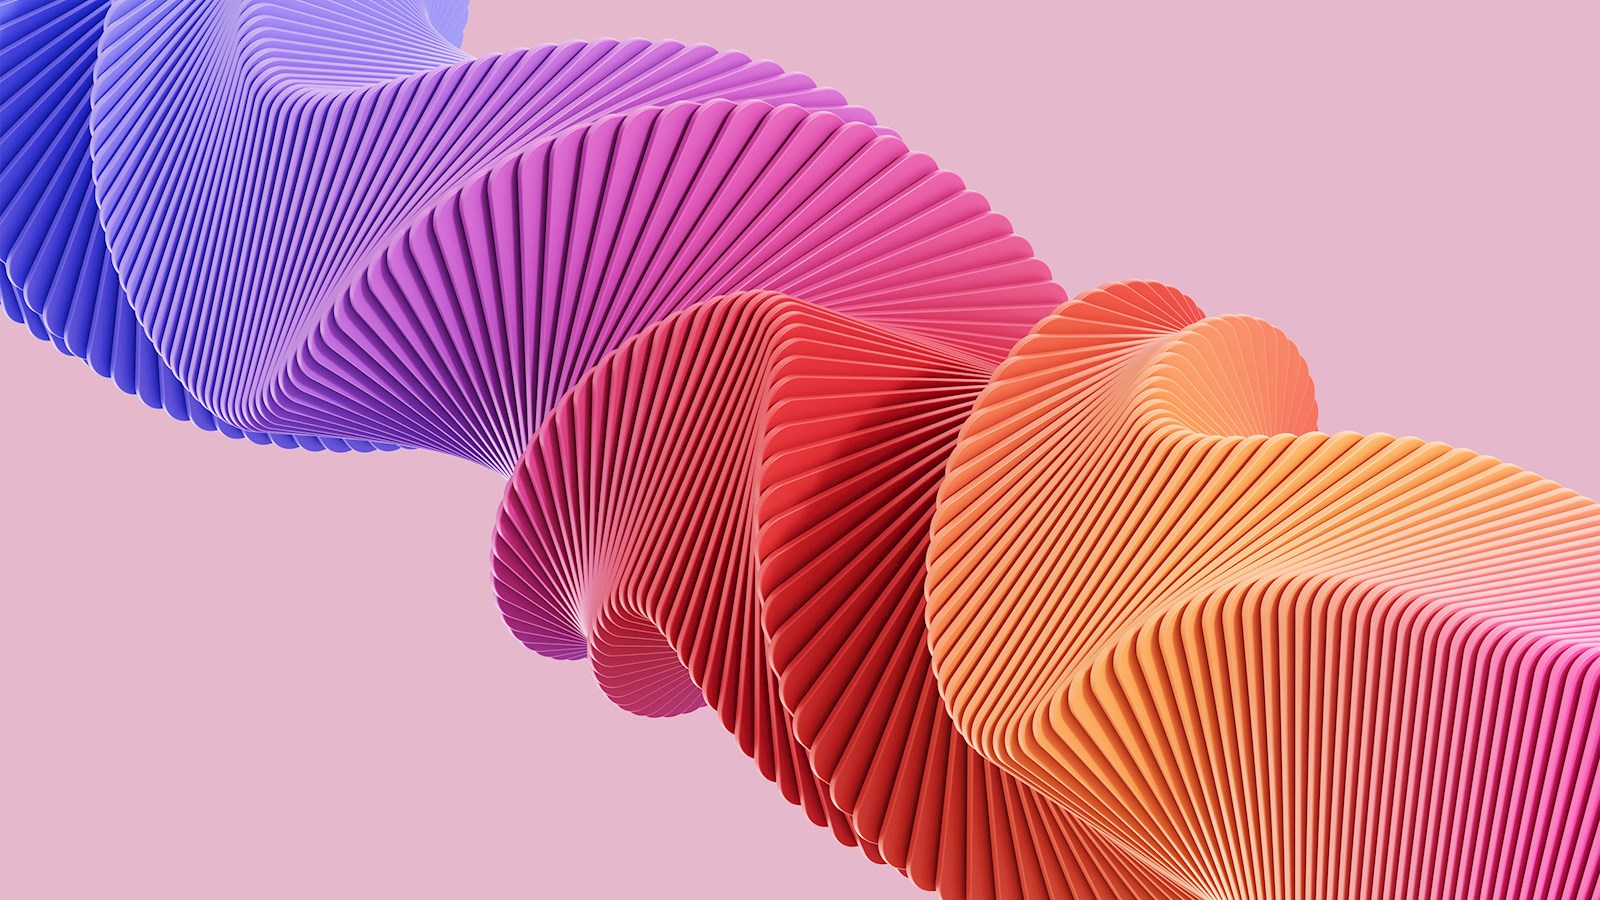 Digitally generated image of abstract twisted shapes